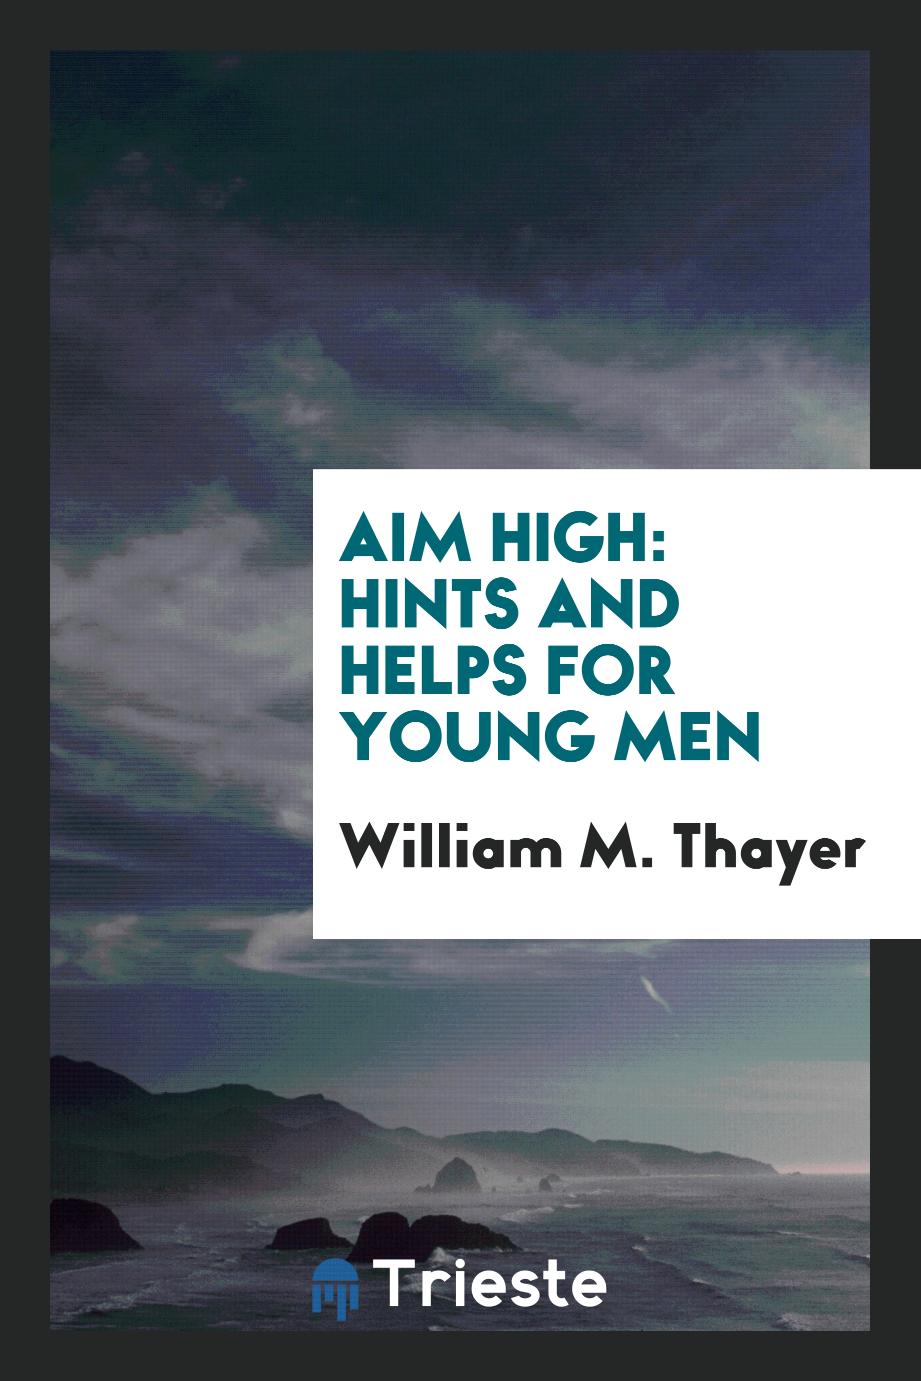 Aim High: Hints and Helps for Young Men